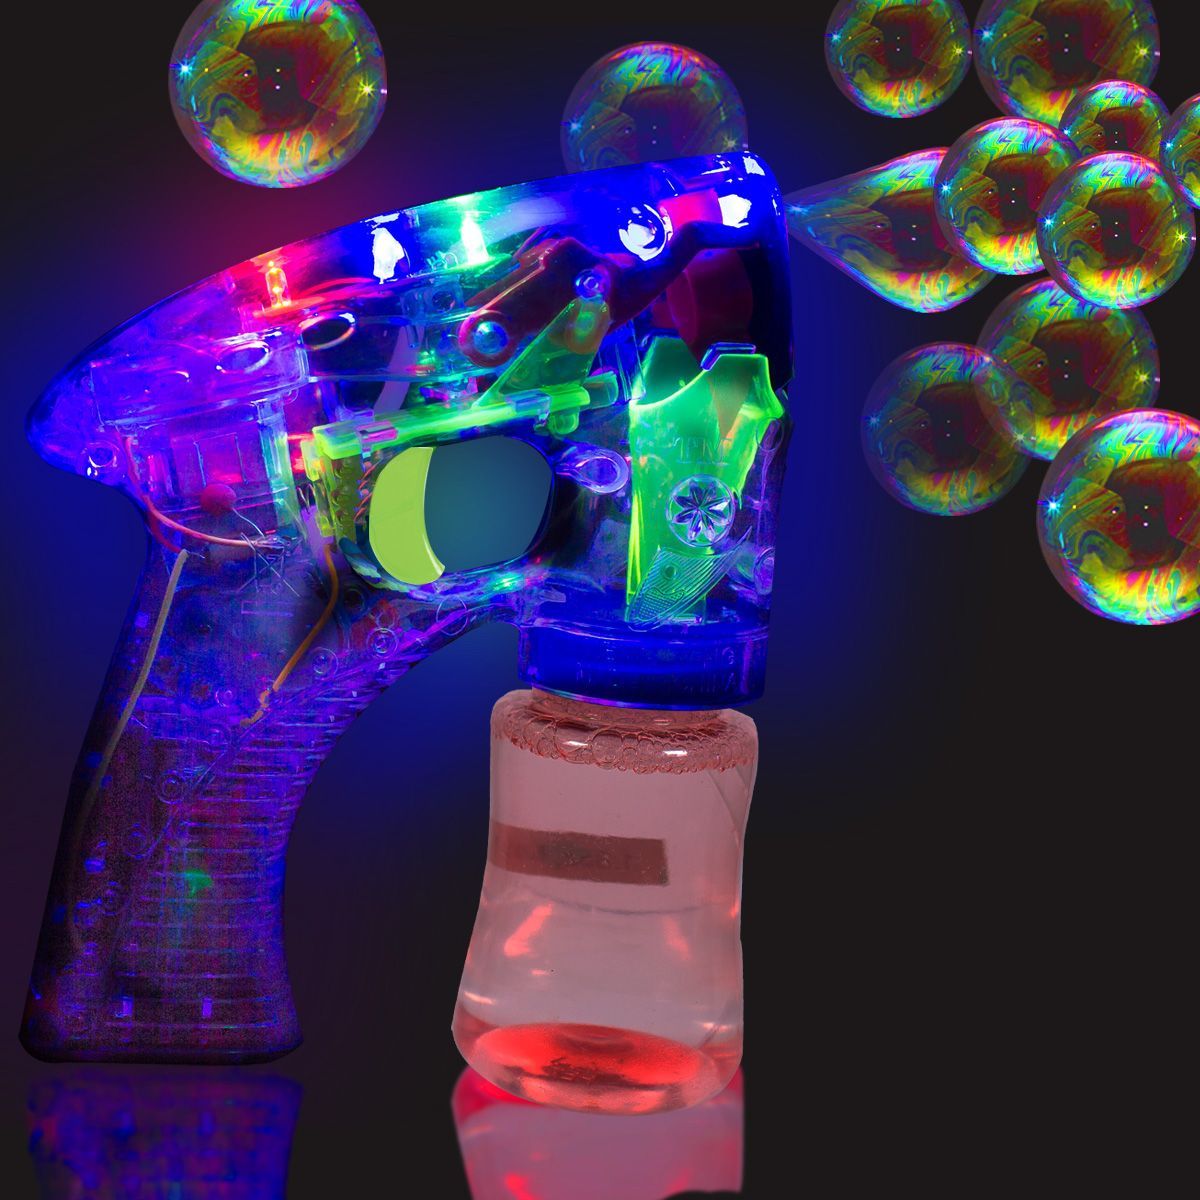 Bubble gun, Create beautiful barrages of bubbles with this fantastic light up bubble gun. Everyone will love to watch the bubbles and flashing lights whenever you pull the trigger on the Bubble gun. Use it in the dark for an enjoyable light show or in the light for simple bubble fun. A Bubble gun is a great toy for the home, classroom, or clinic that will keep kids entertained for hours! This bubble gun is a fantastic addition to your sensory collection. The Bubble Gun is great as a reinforcer for your ABA 